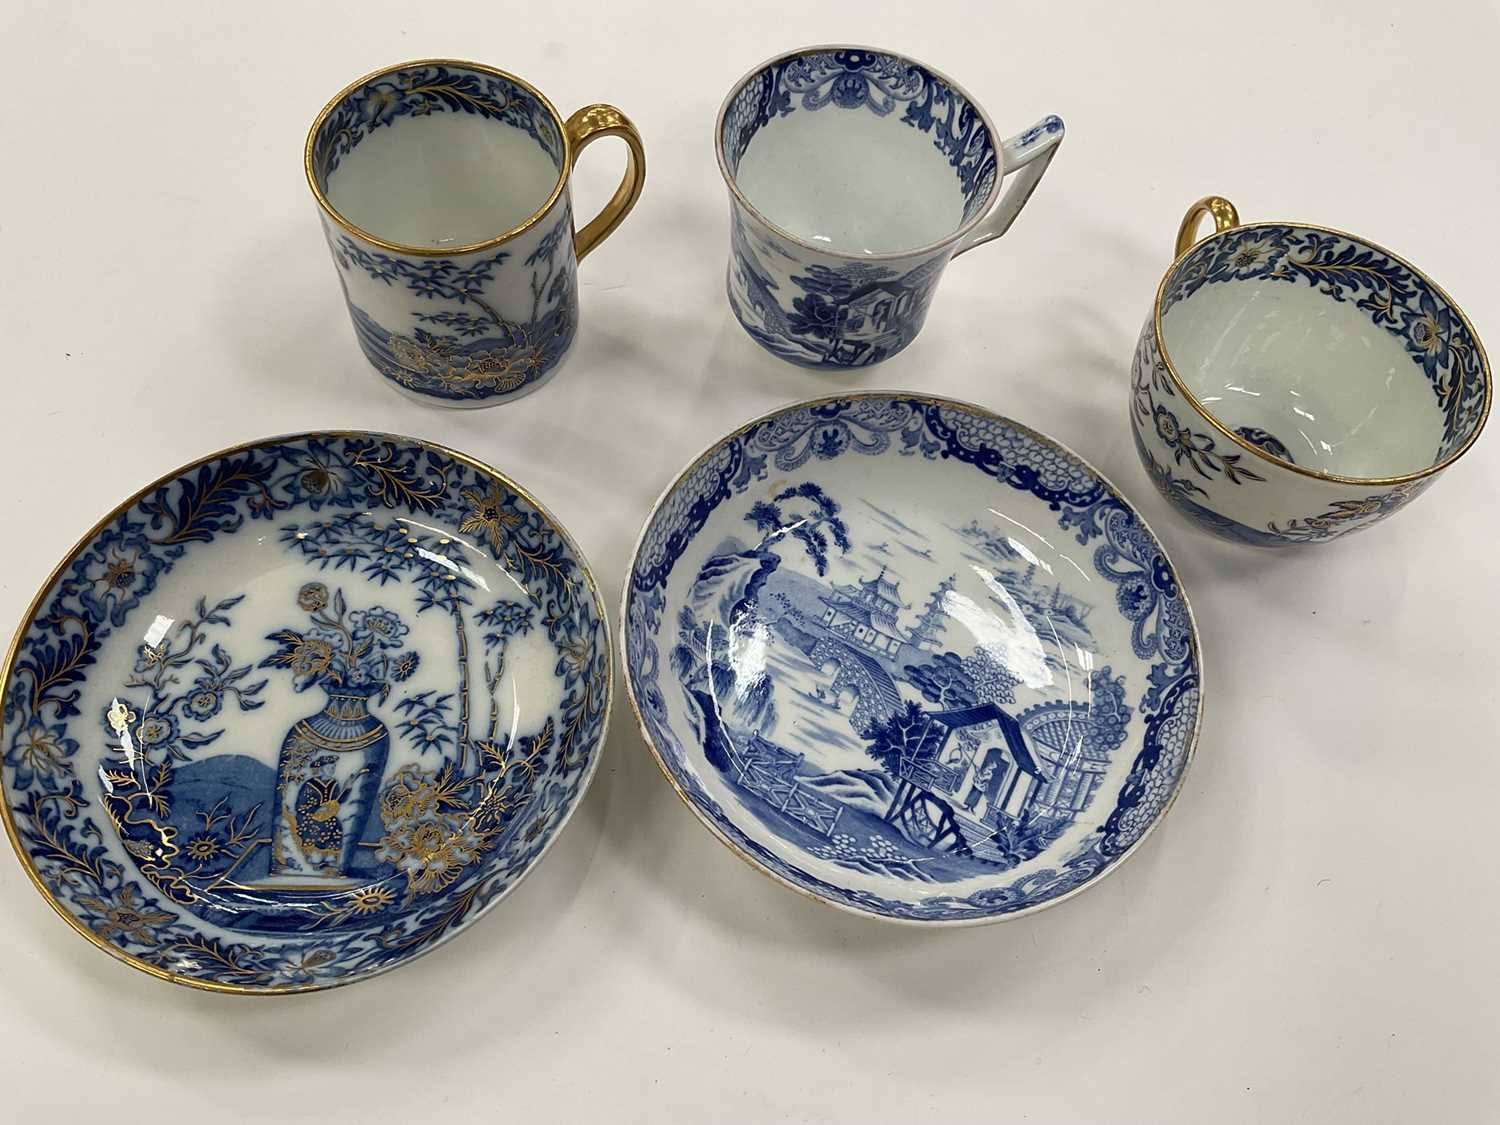 Wedgwood blue printed coffee cup and saucer, and another blue printed trio - Image 6 of 6